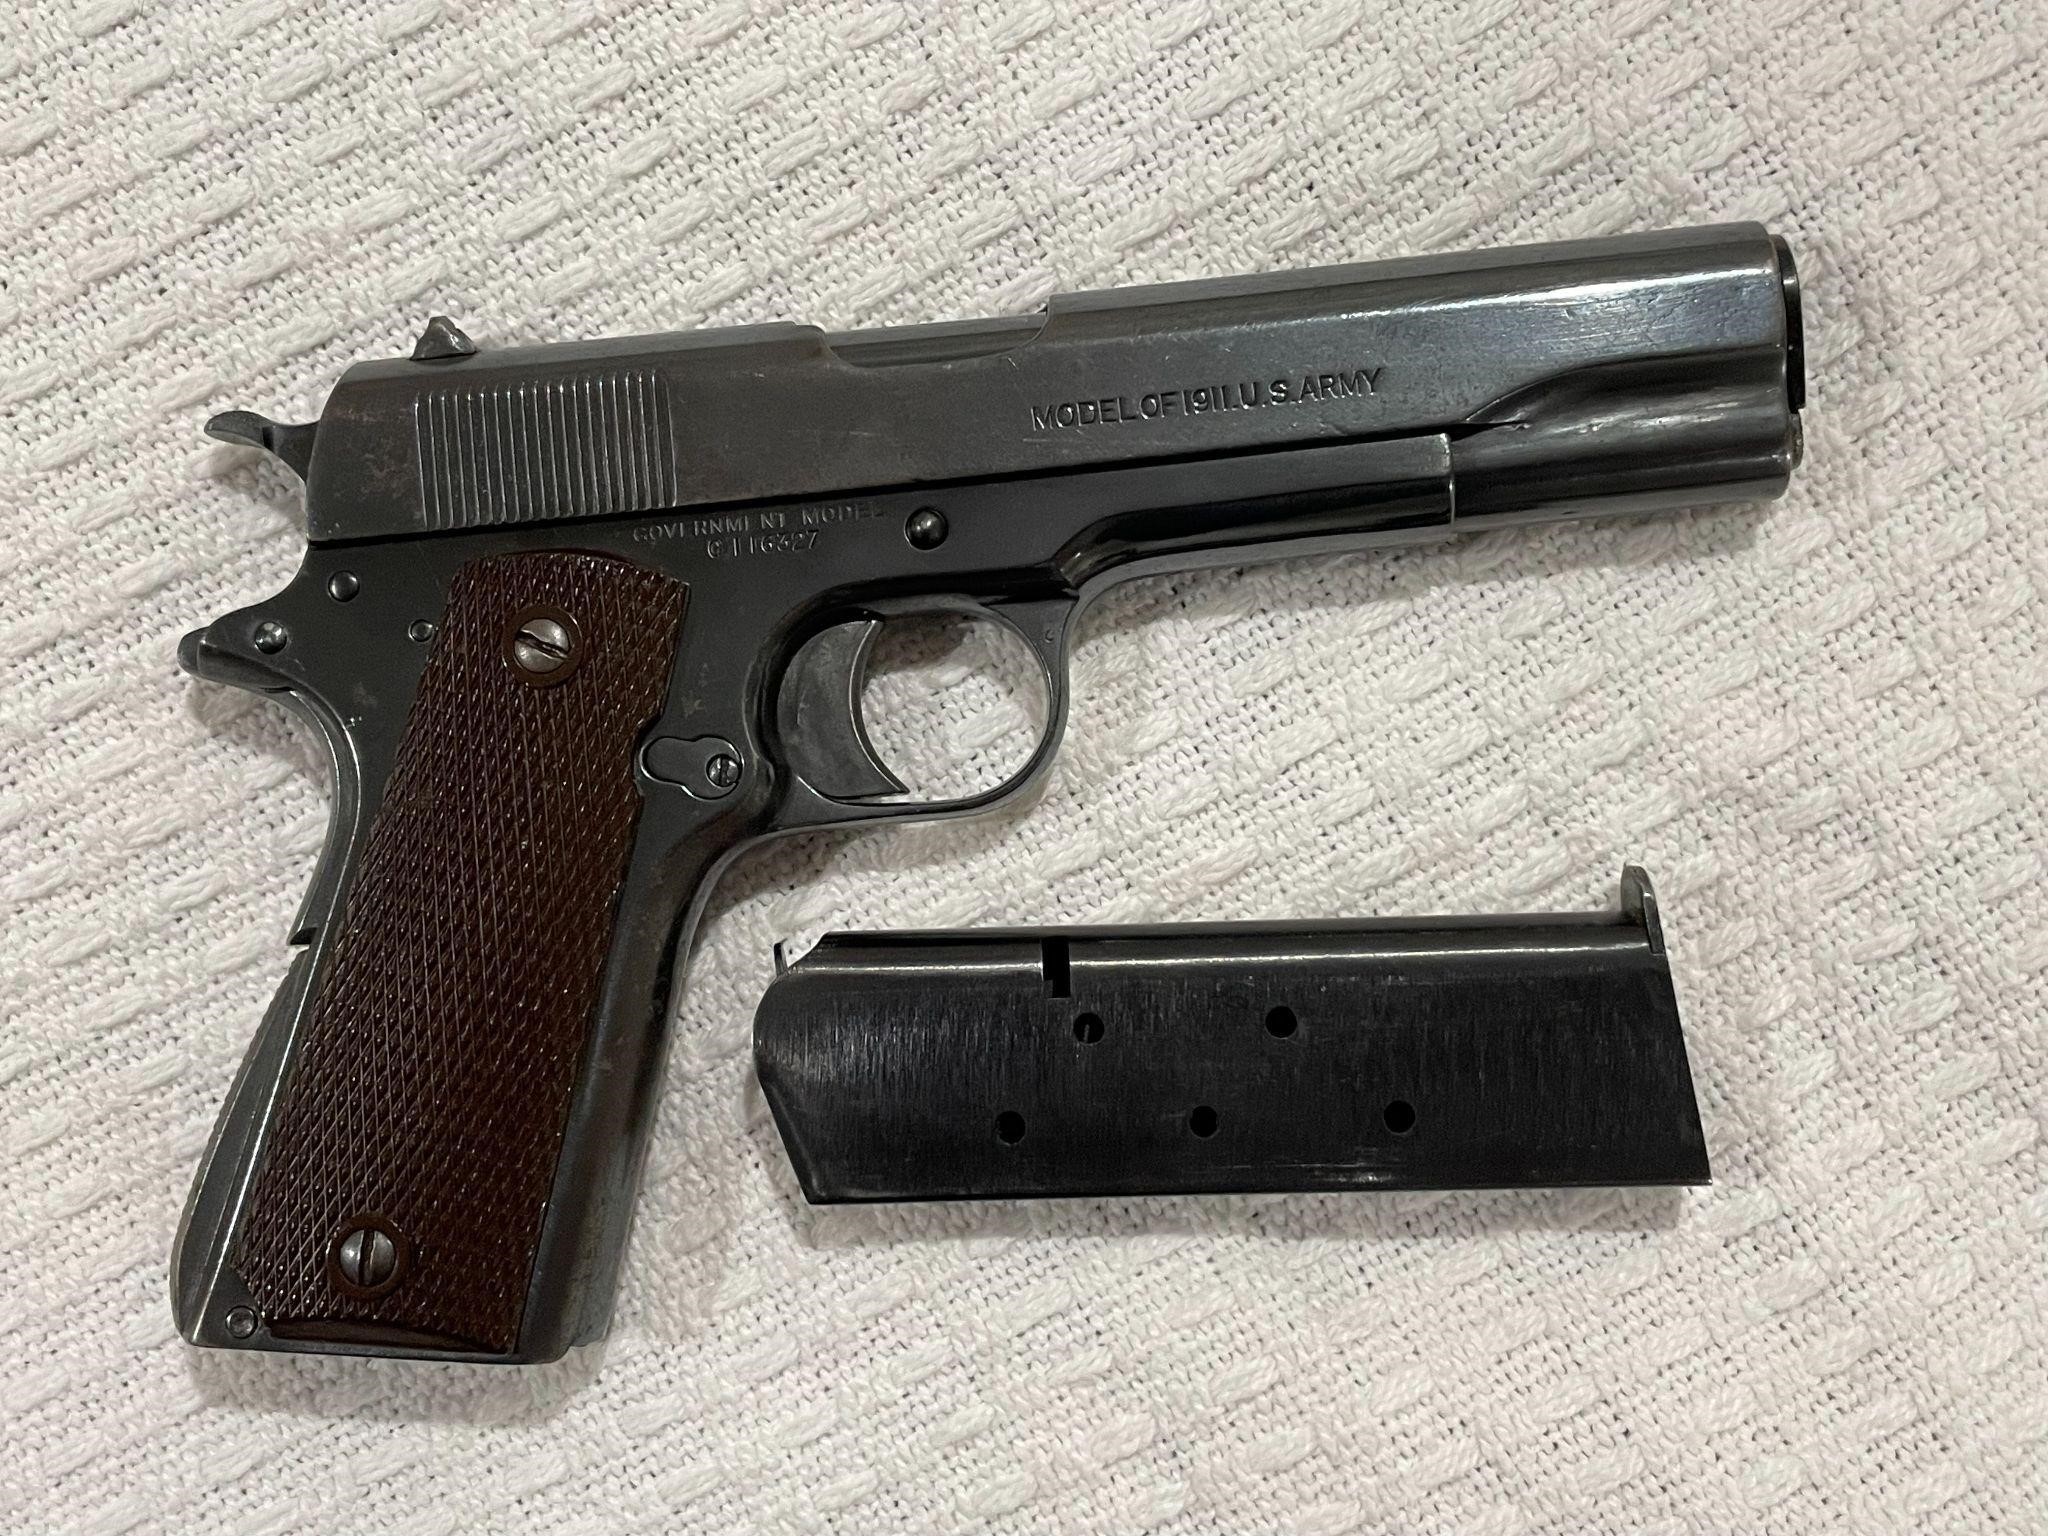 Colt 1911 US Army Government Issued .45